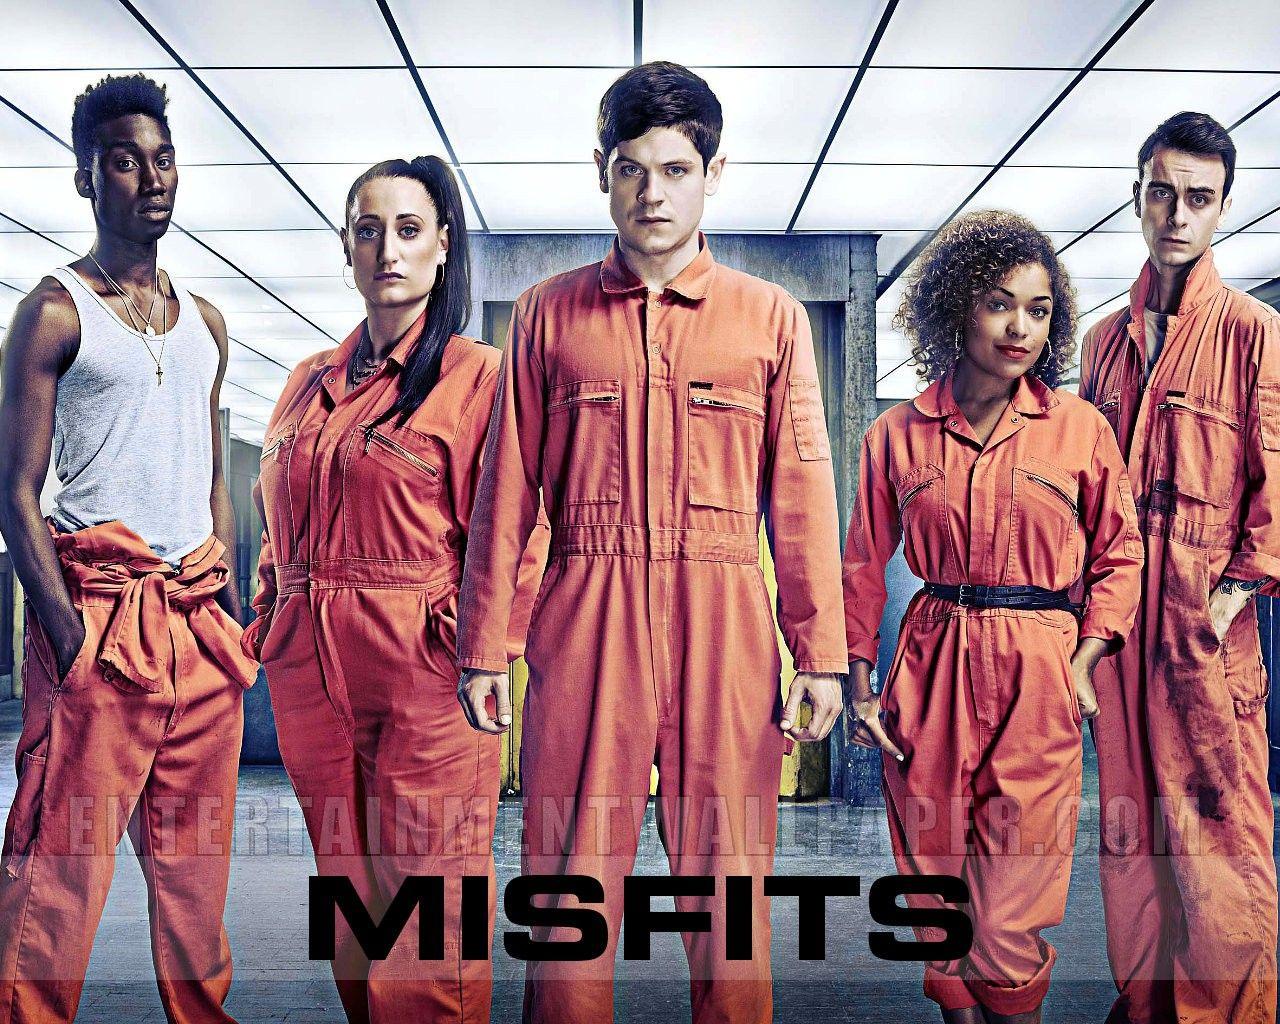 Rudy Wade image Misfits HD wallpaper and background photo